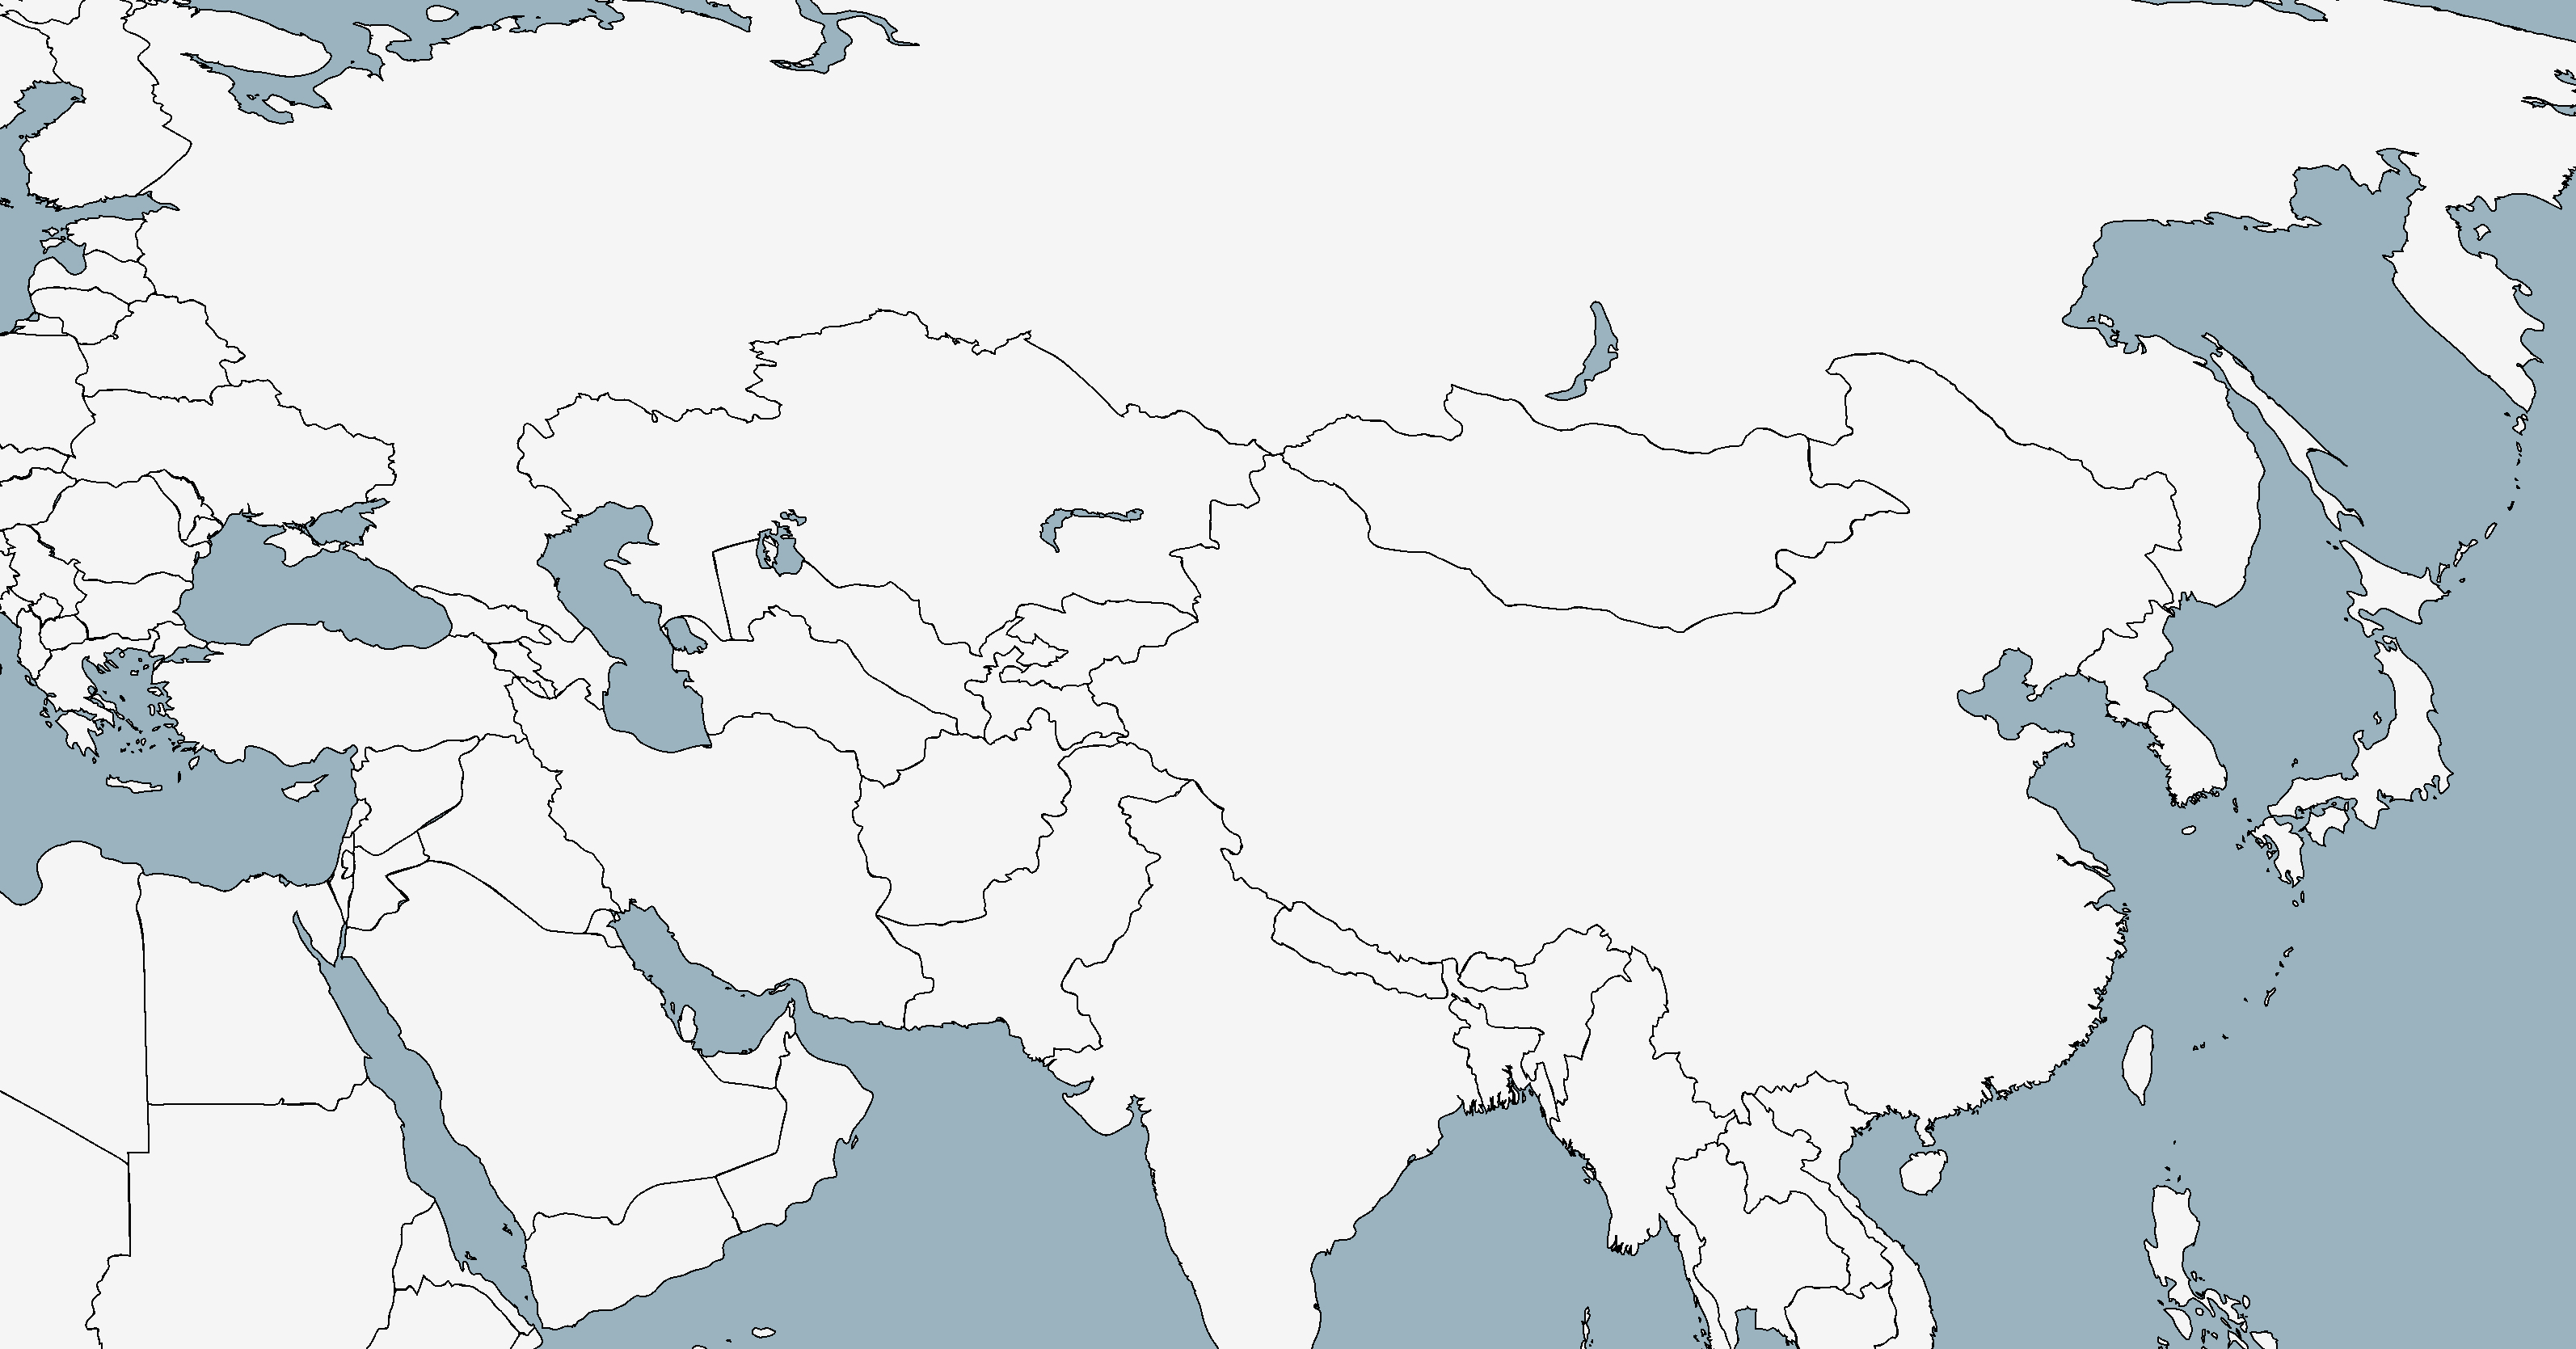 Blank Outline Map Middle East